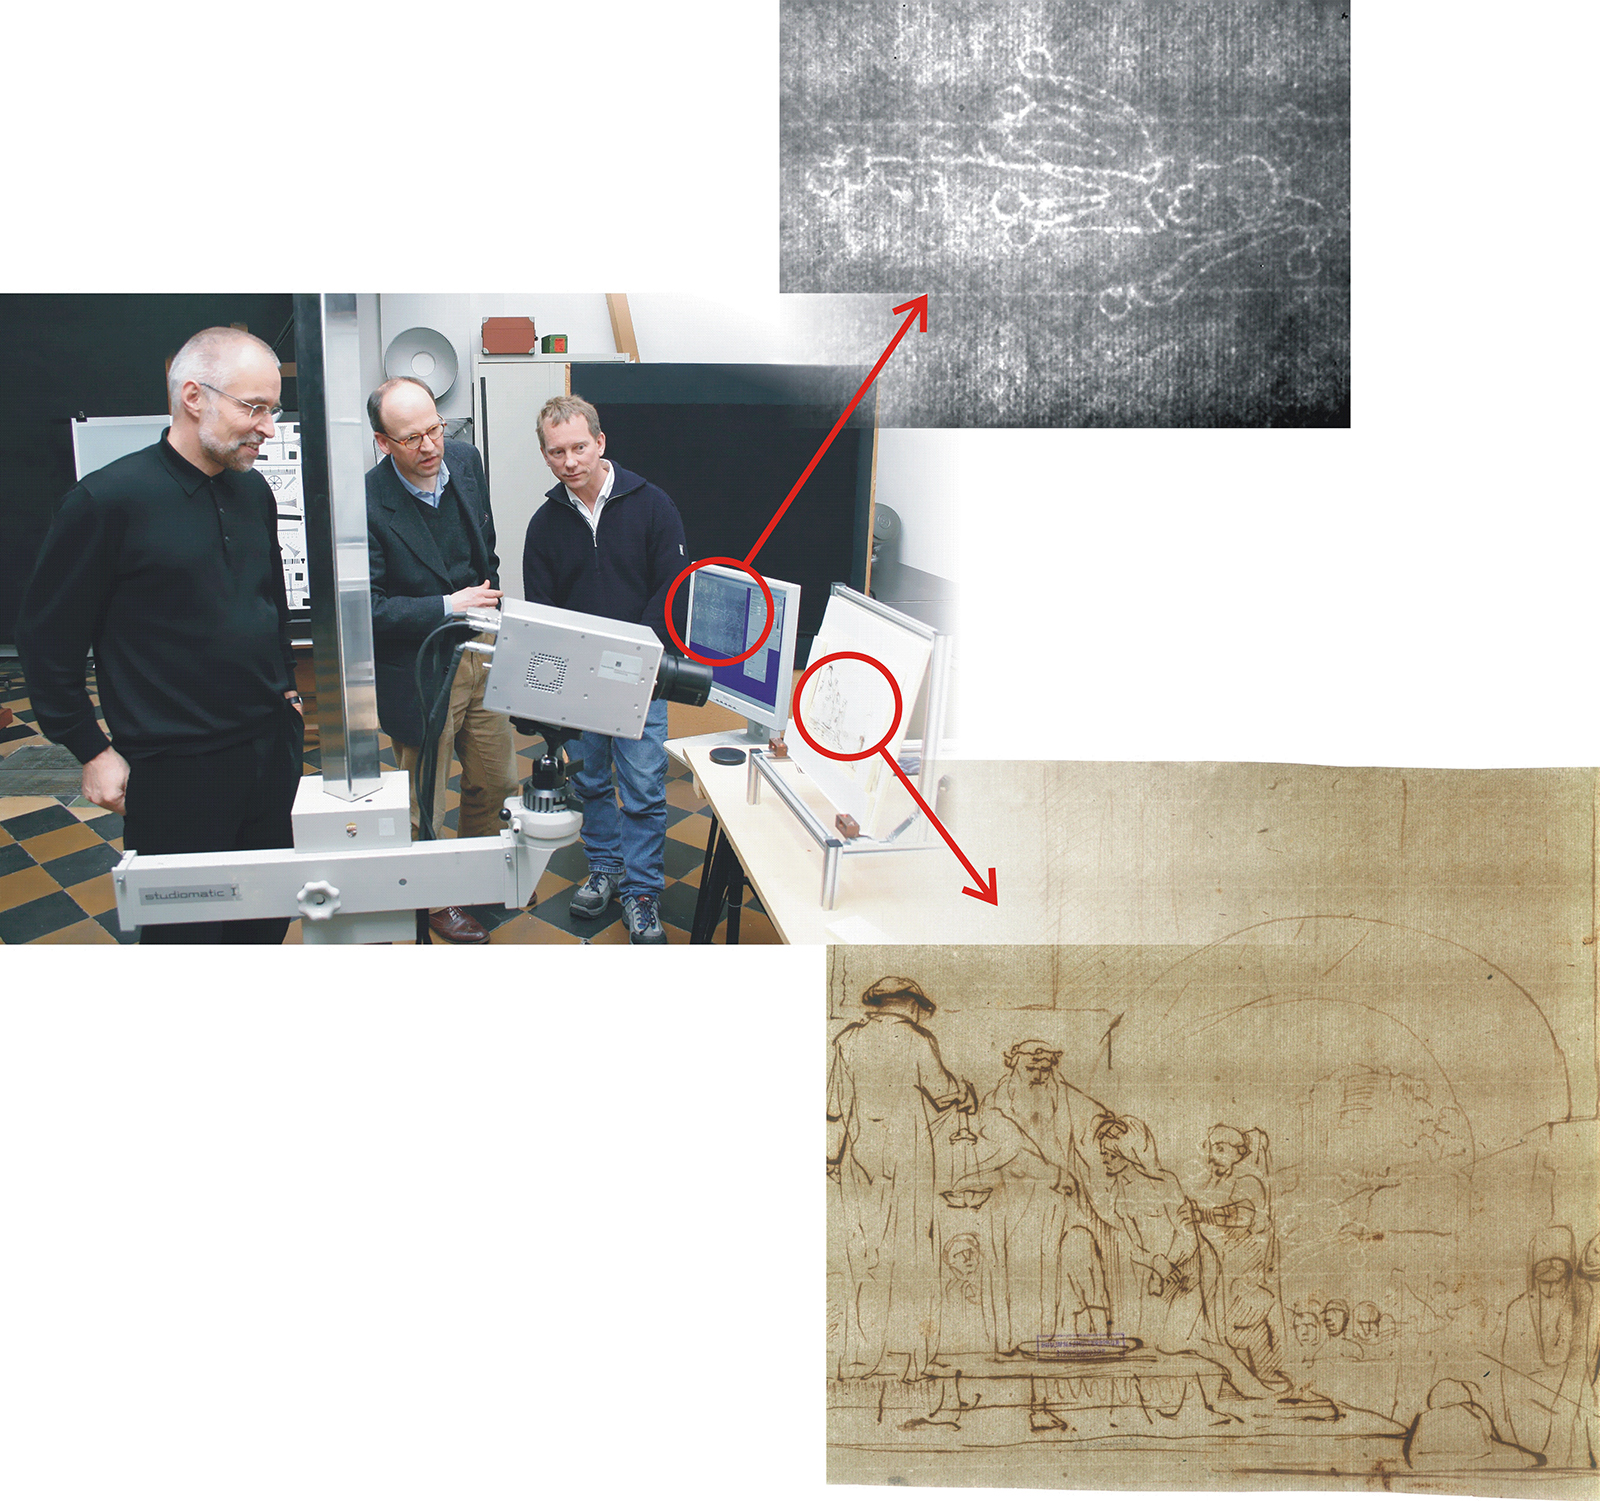 Photo of a drawing by Jan Lievens of the Rembrandt School (left). In this backlit image, the crowned fleur-de-lis watermark is not visible, unlike in the thermographic image on the right.